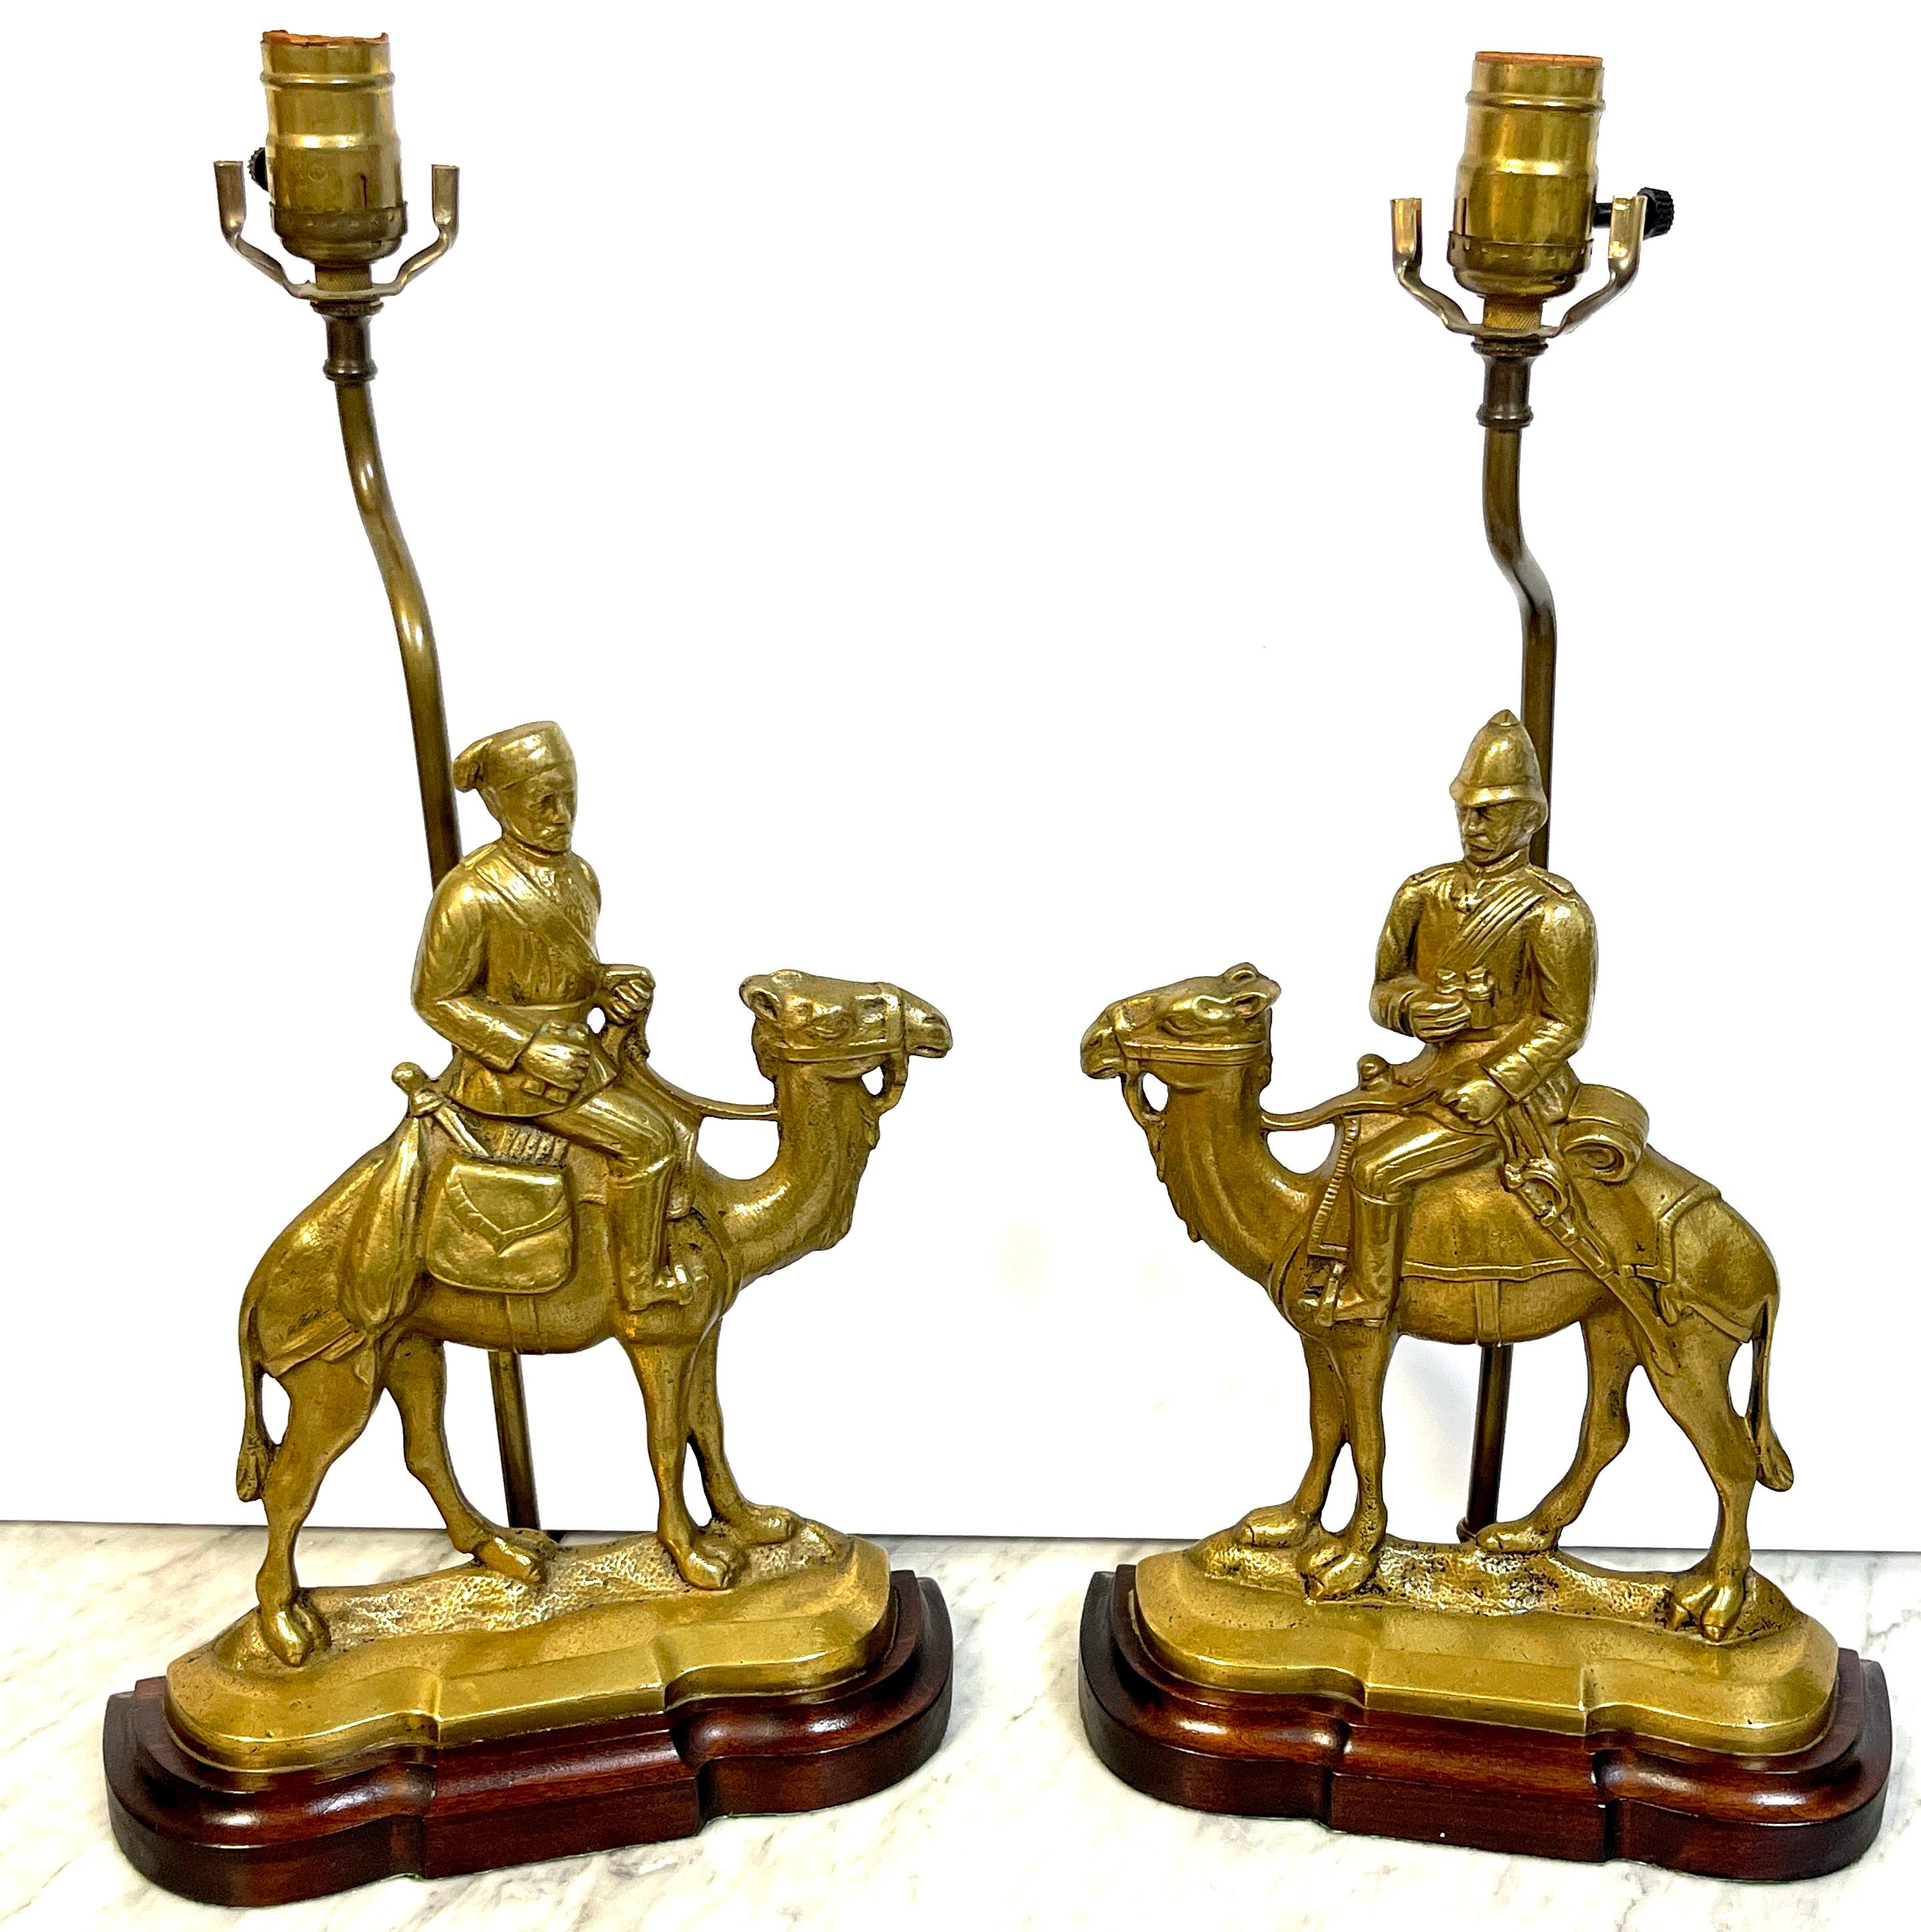 Pair of Anglo-Indian Brass Officer & Camel Doorstops, Now as Lamps 
England, circa 1900s

A rare find a pair of Commemoration Brass Doorstops of 19th century Anglo -Indian officers seated on camels, now mounted as lamps

Overall